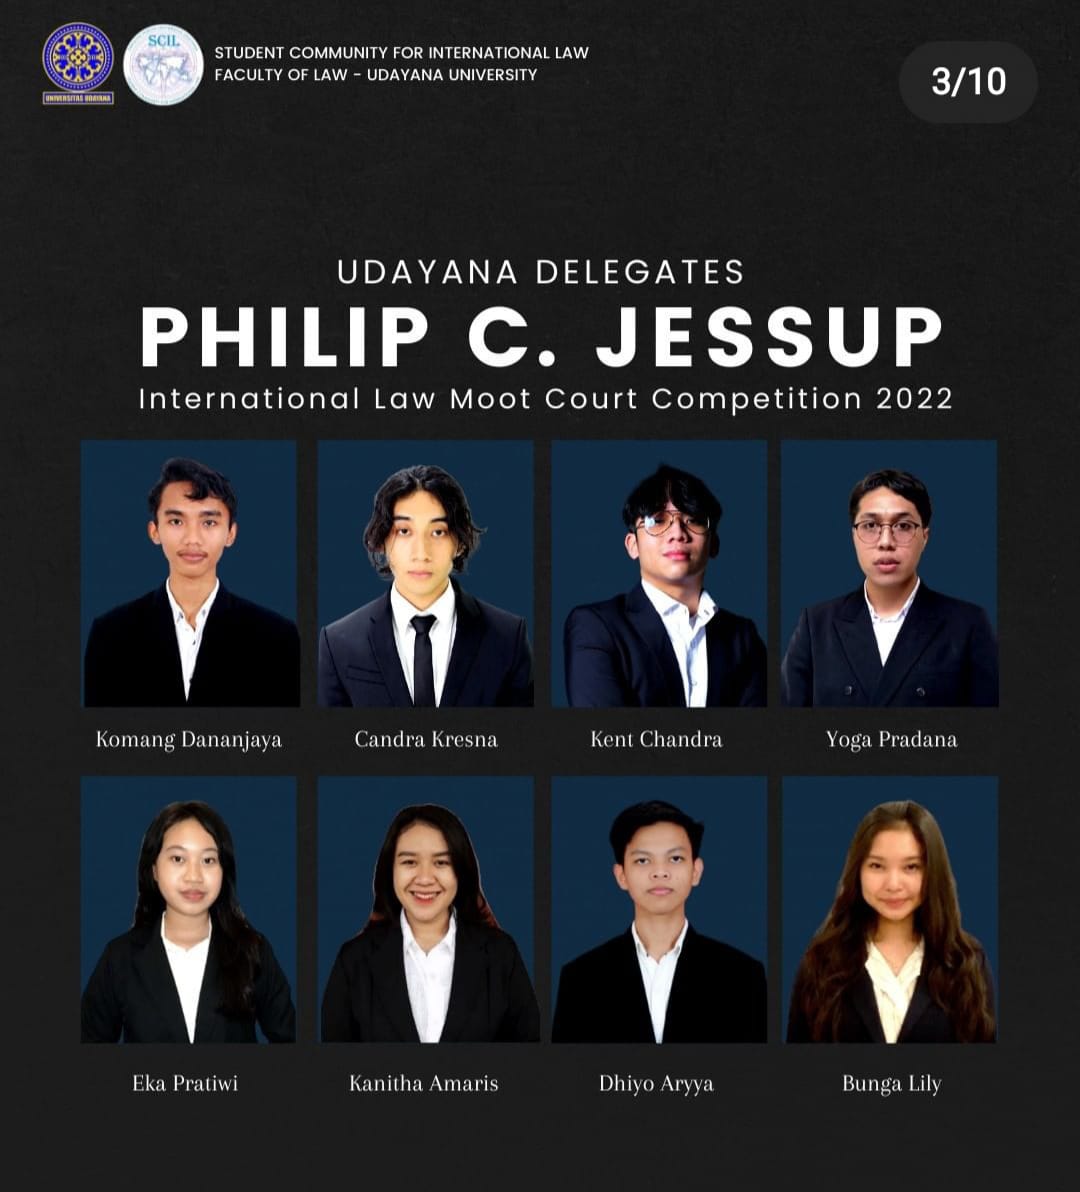 Congratulations on the Achievement of Unud Faculty of Law Students in The Philip C. Jessup Moot Court Competition